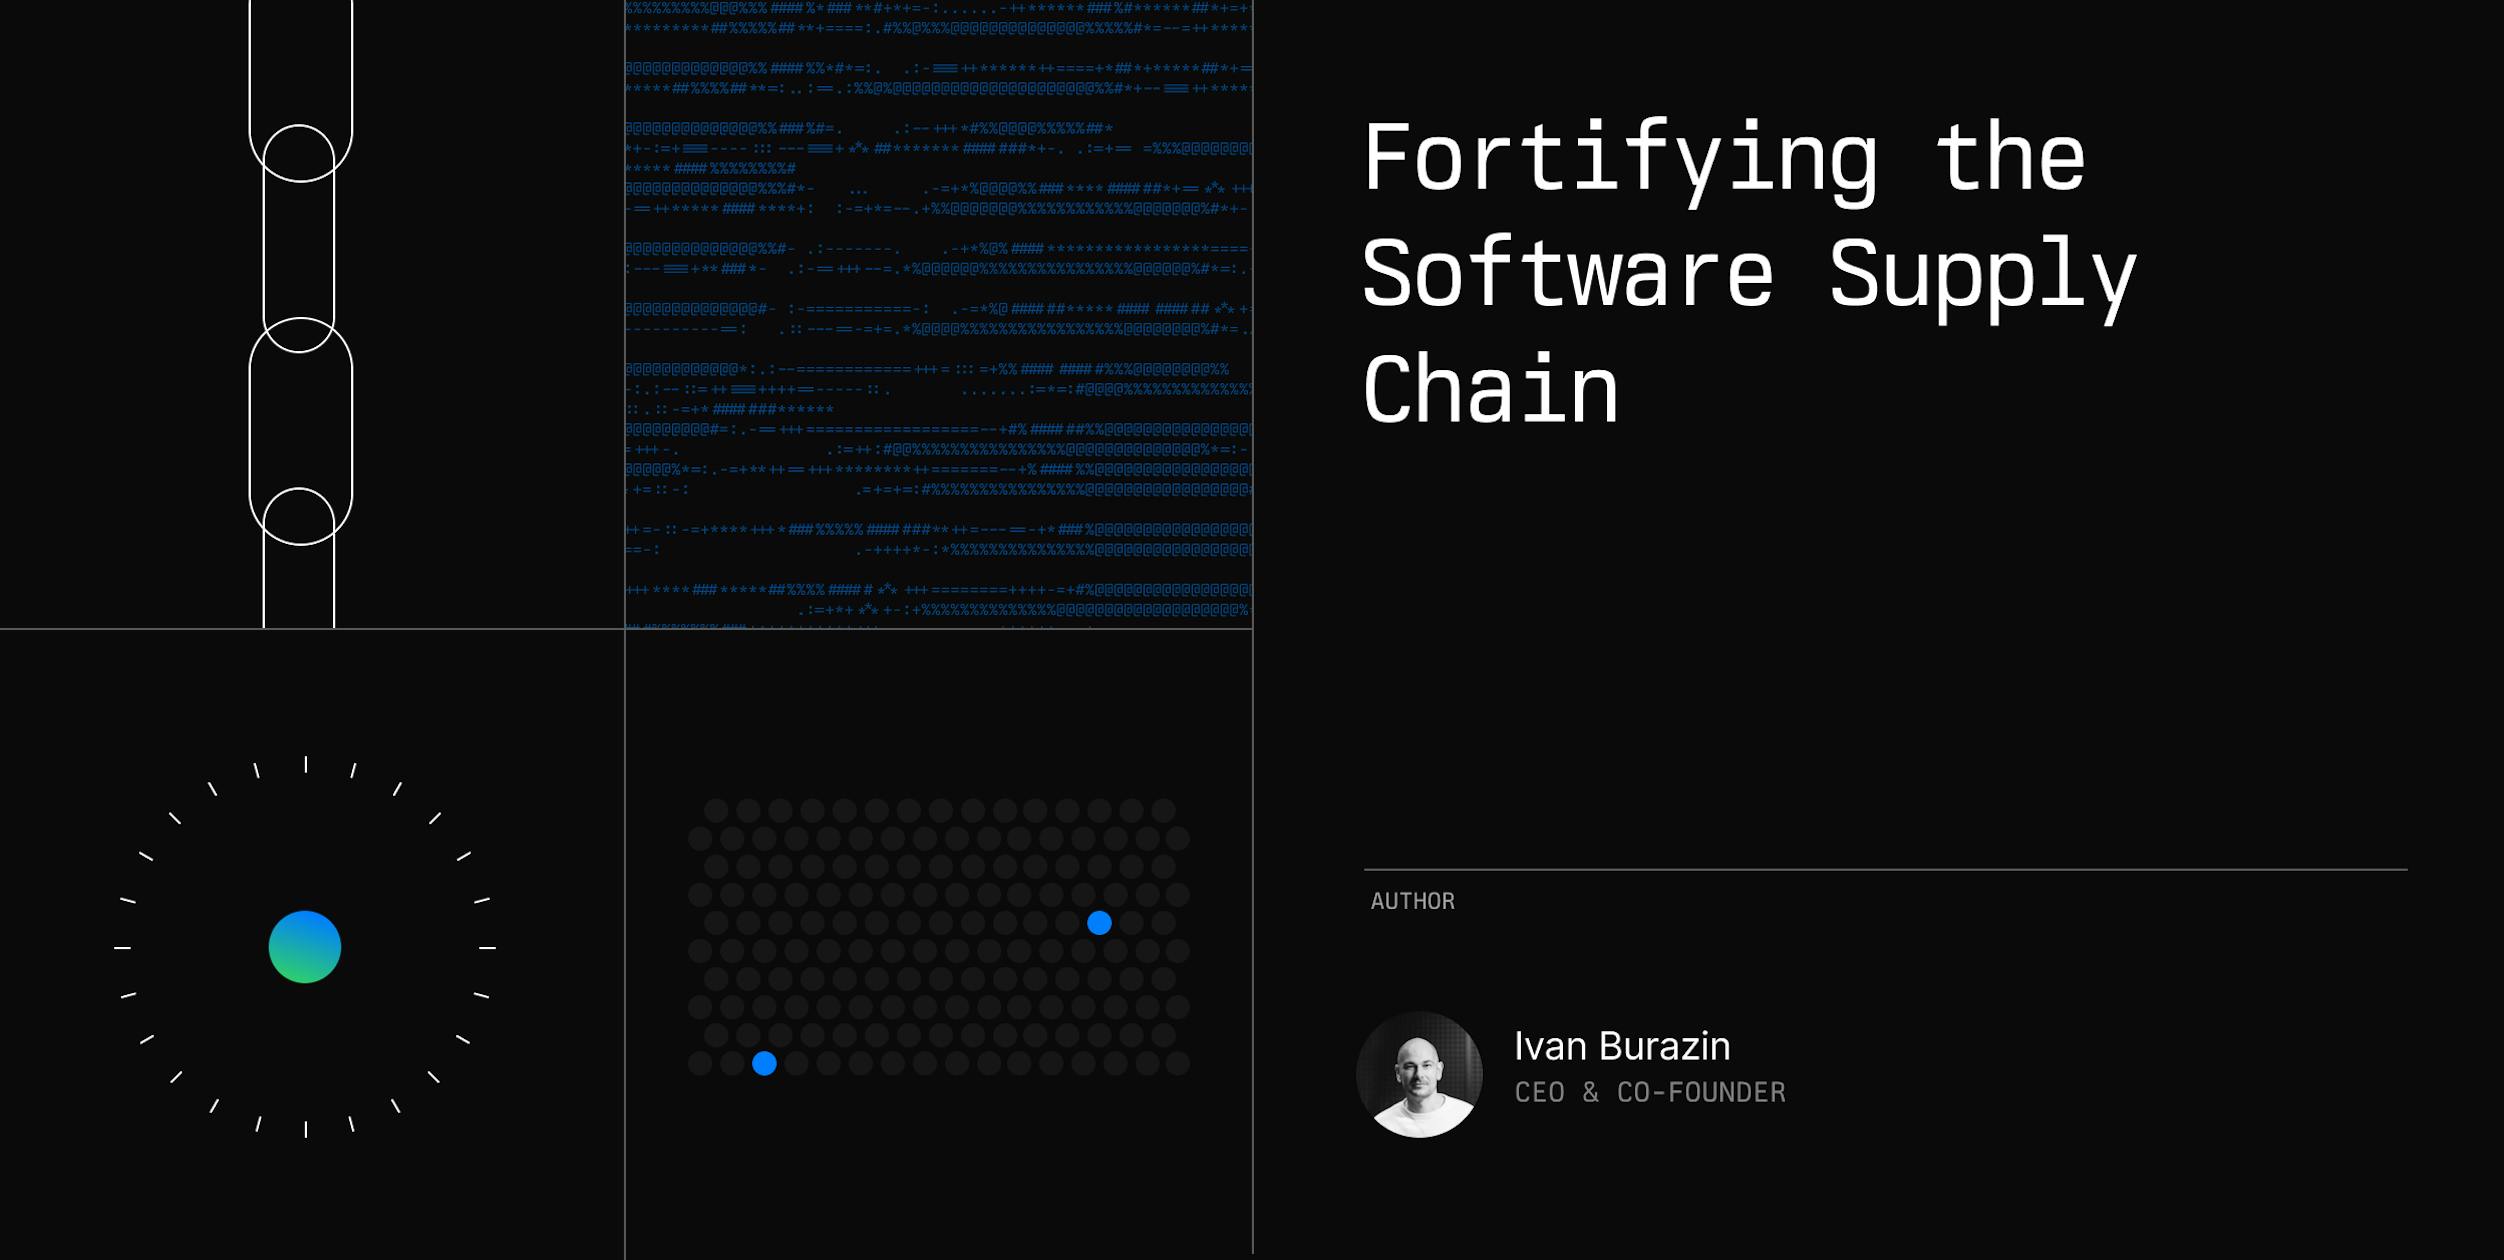 Fortifying the Software Supply Chain